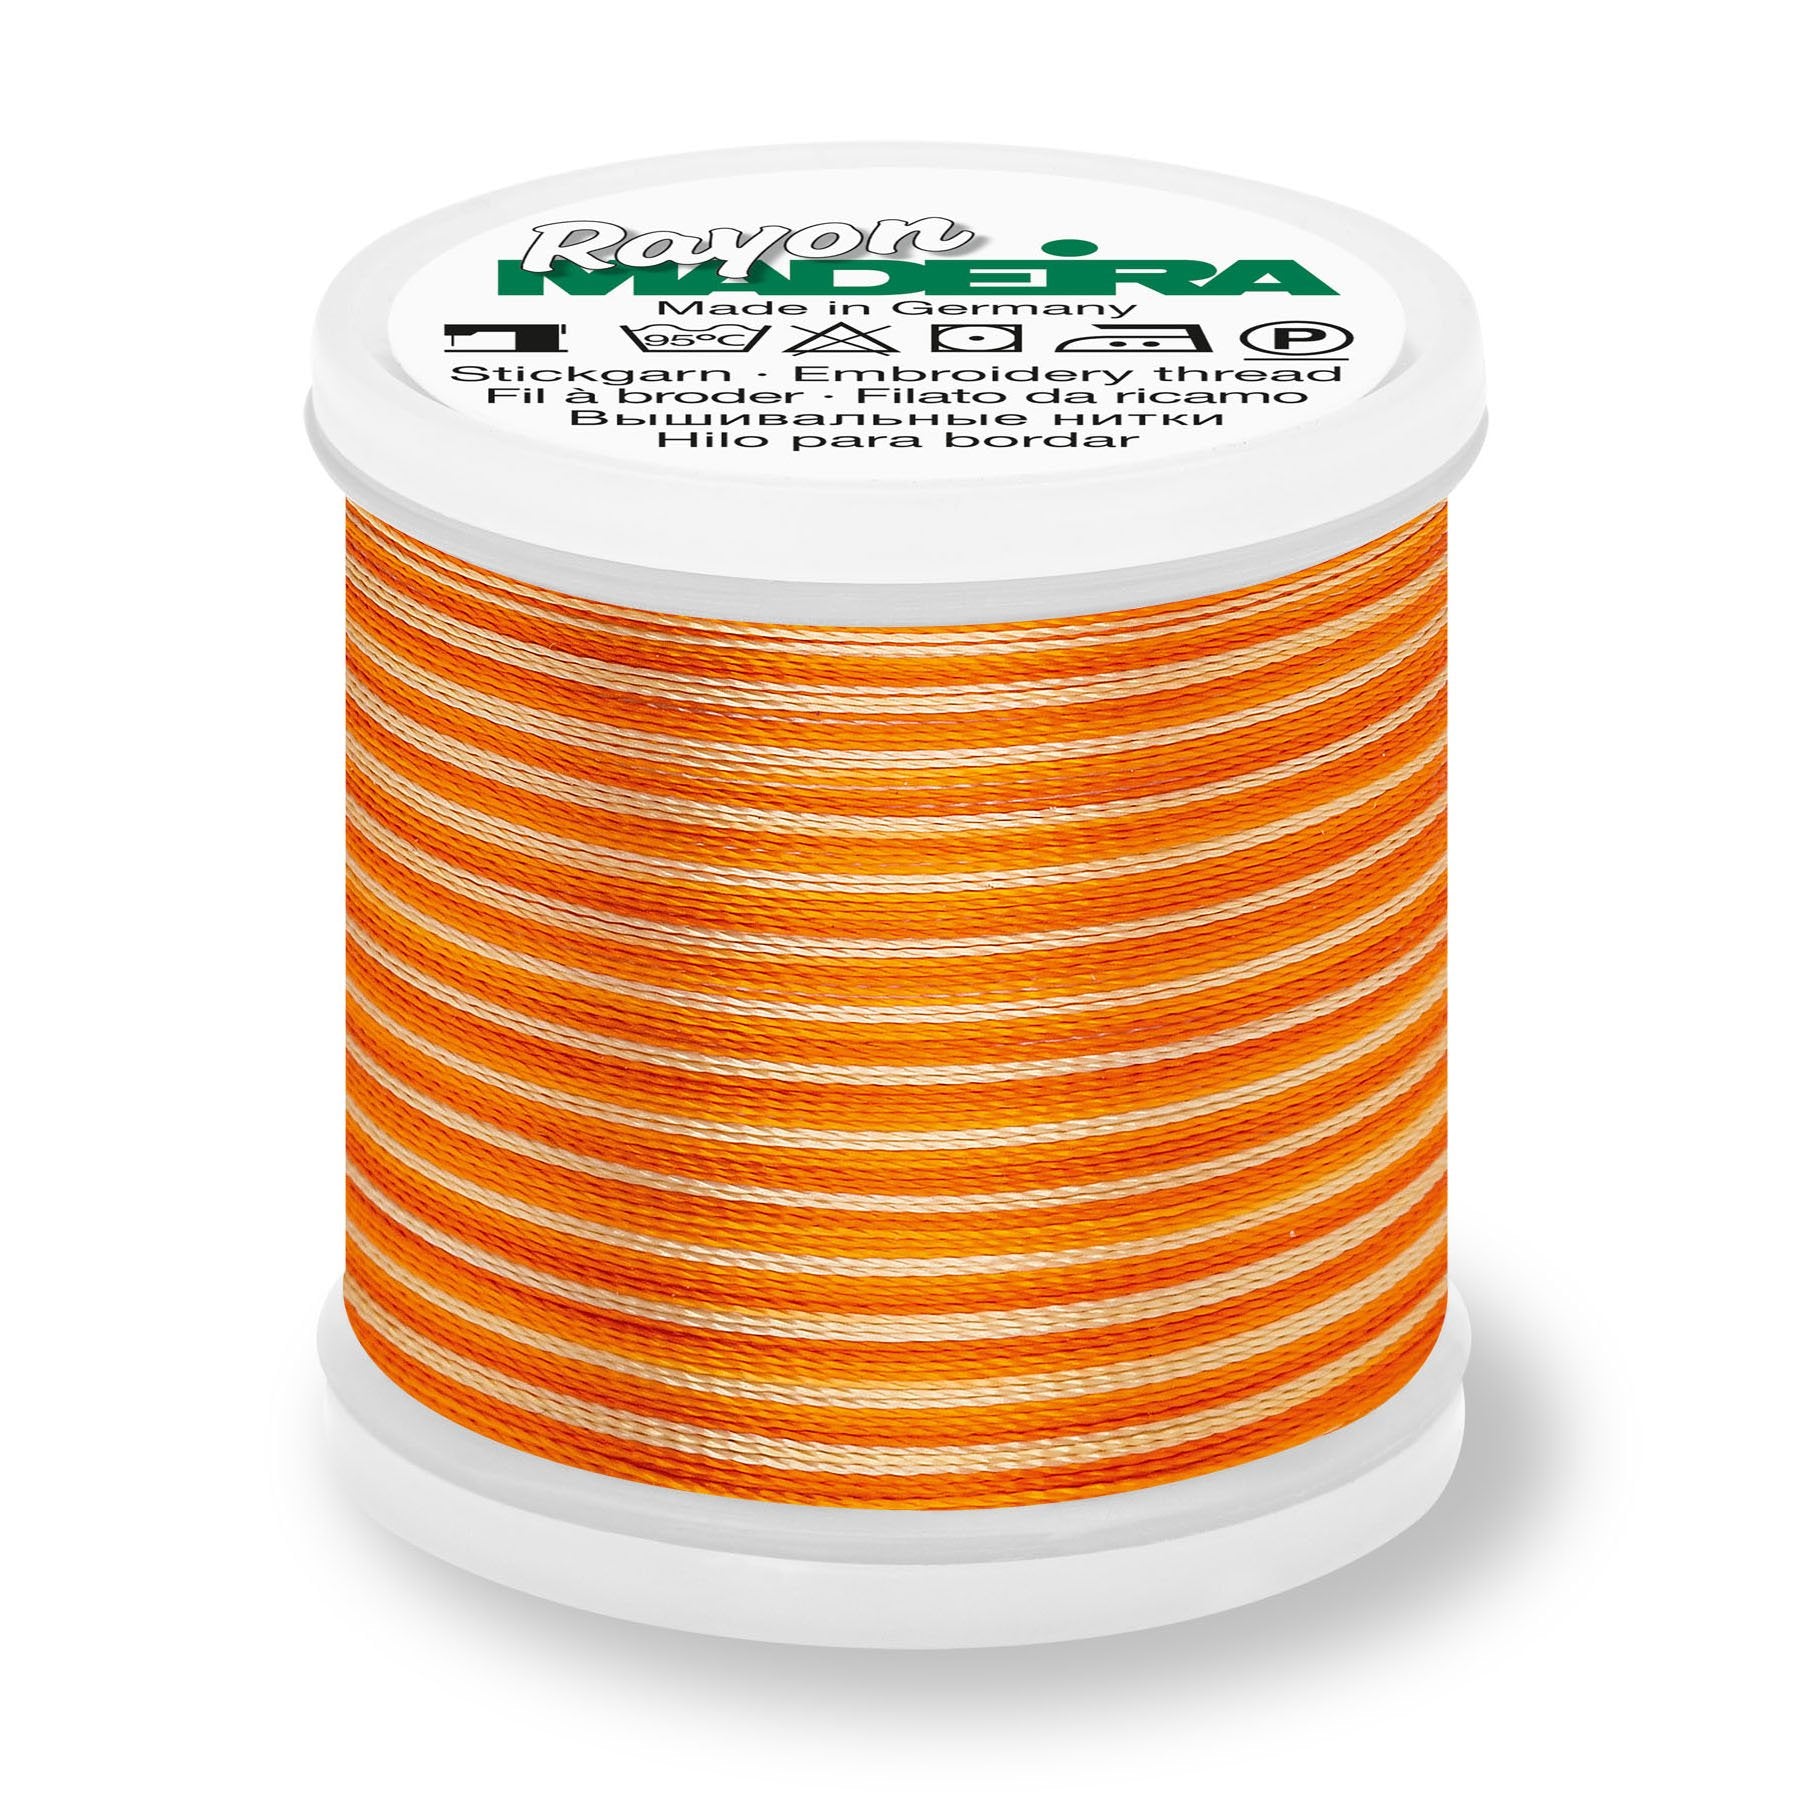 Madeira Rayon 40 Embroidery Thread 200m Multi #2053 Oranges from Jaycotts Sewing Supplies